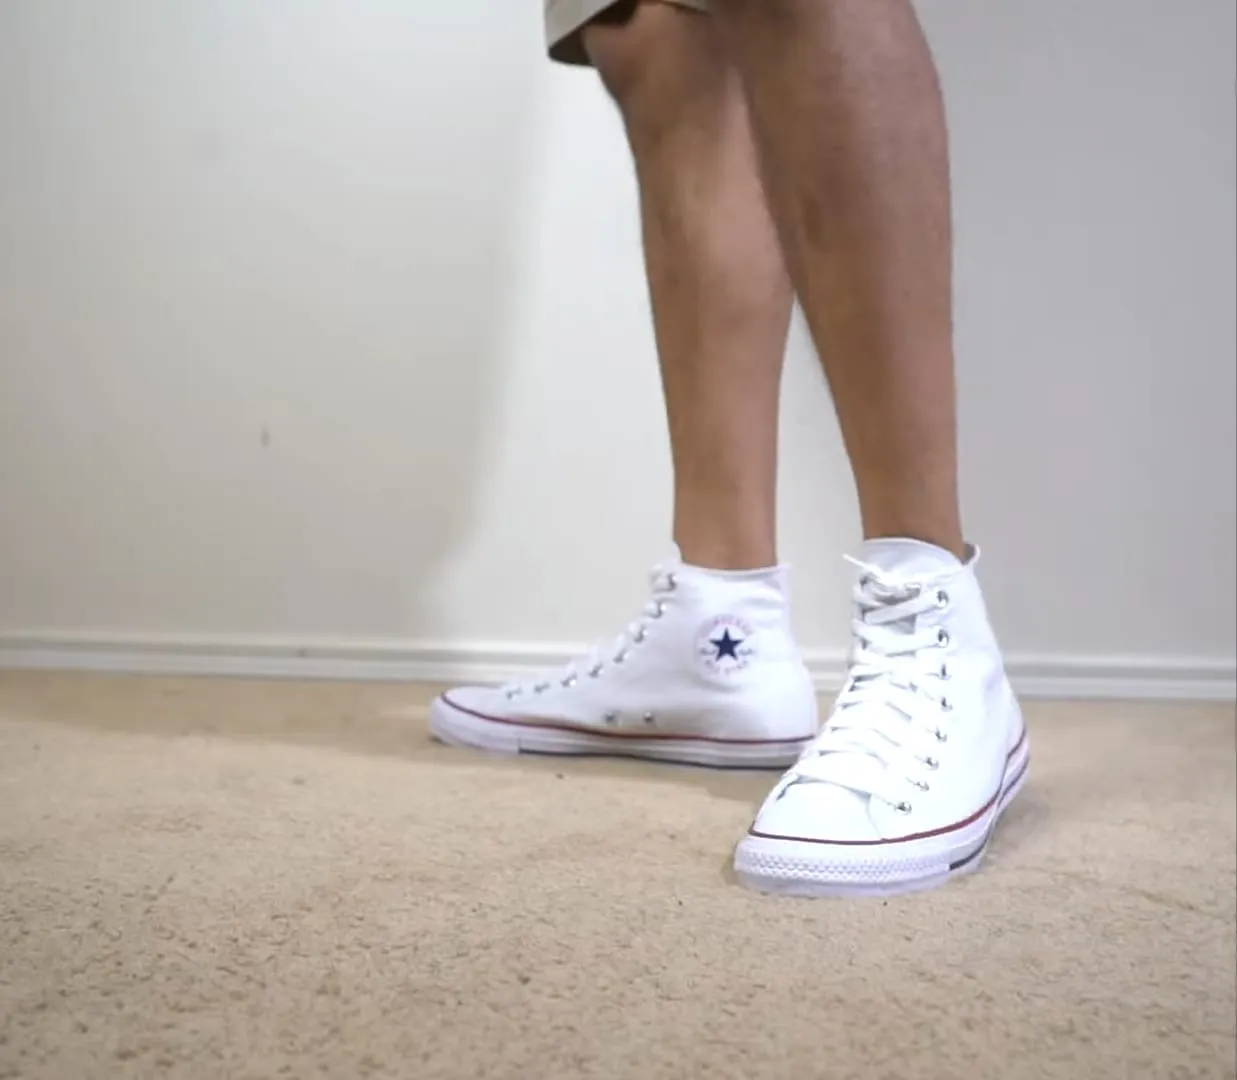 Are Converse Waterproof: My Personal Experience with Wearing Converse ...